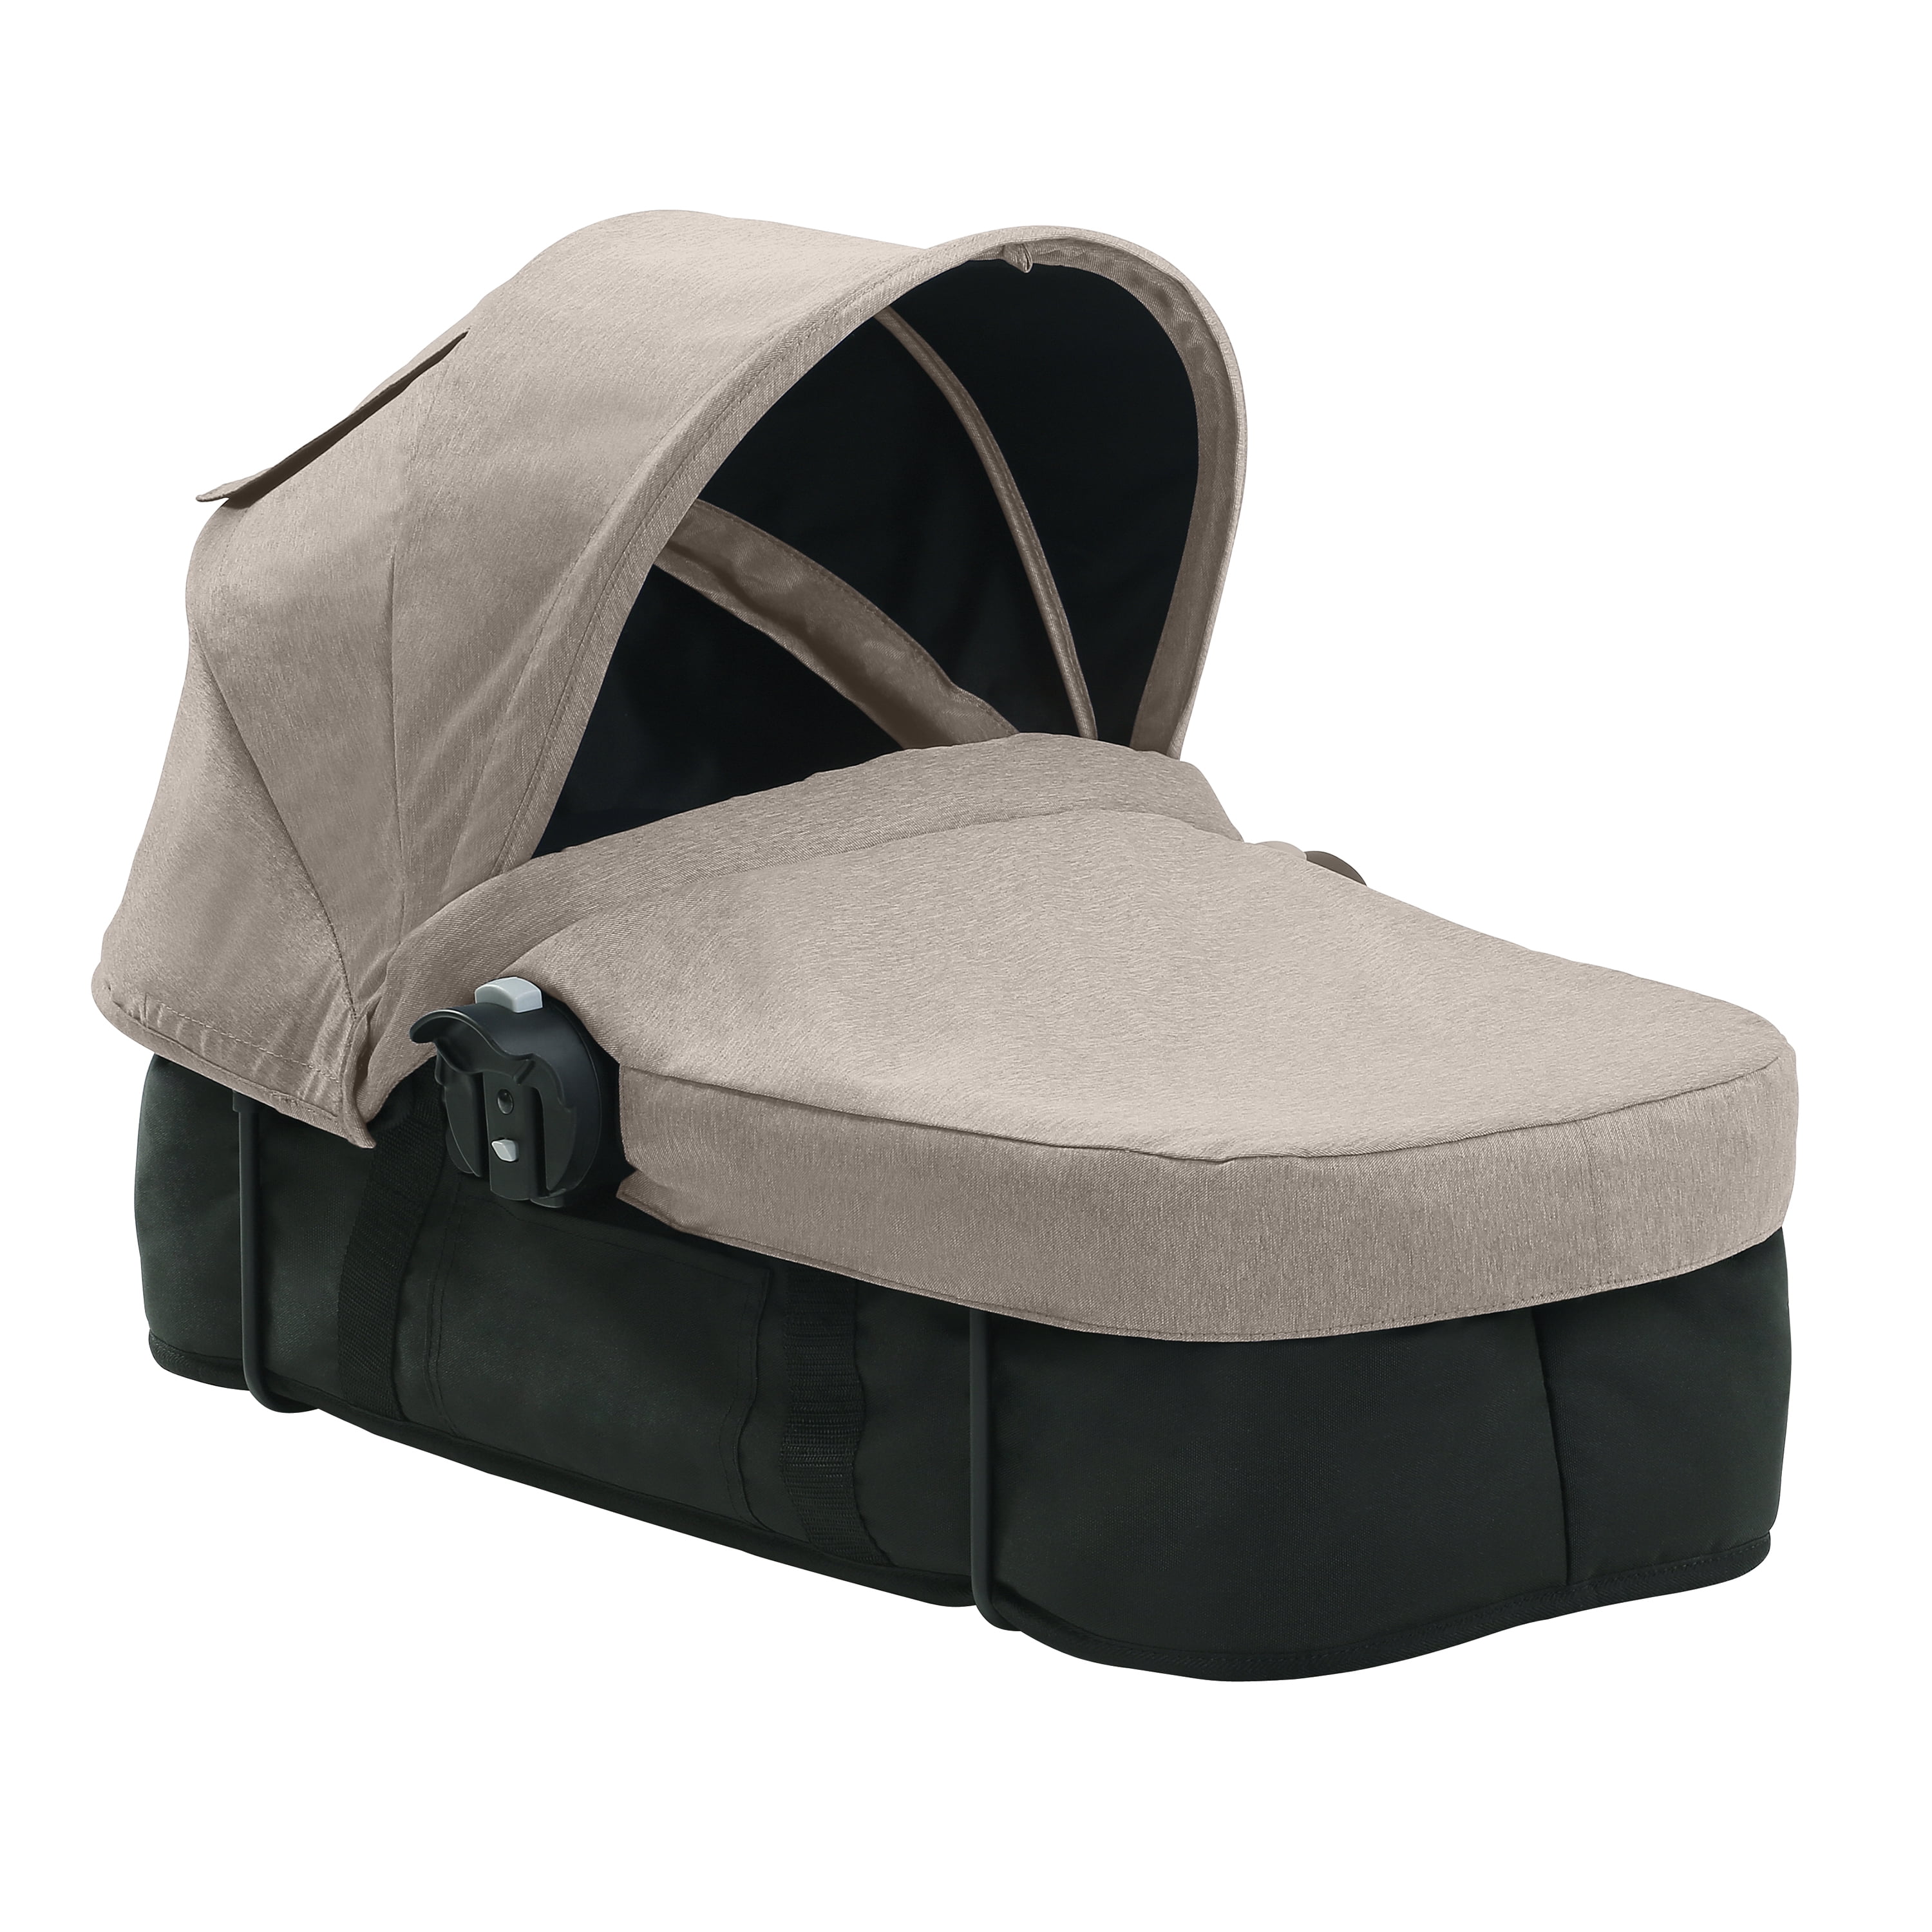 Baby Jogger City Select LUX Pram Bassinet Kit in Slate New Free Shipping! 